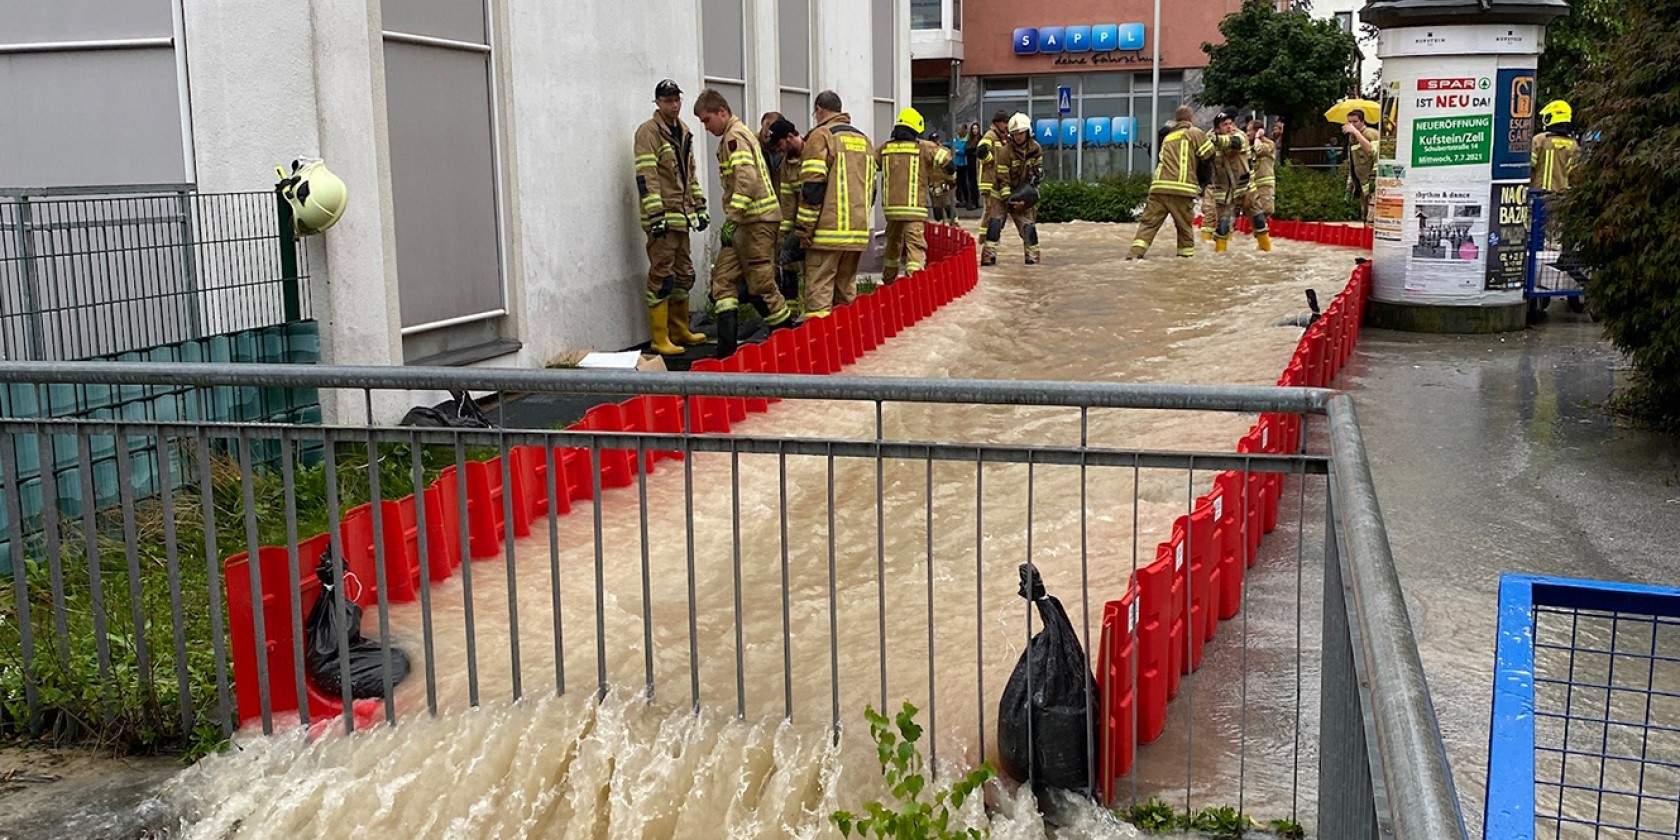 The firefighters from Kufstein worked tirelessly to stop the enormous volume of water spreading through the area around the city of Kufstein during the devastating floods of July 2021.